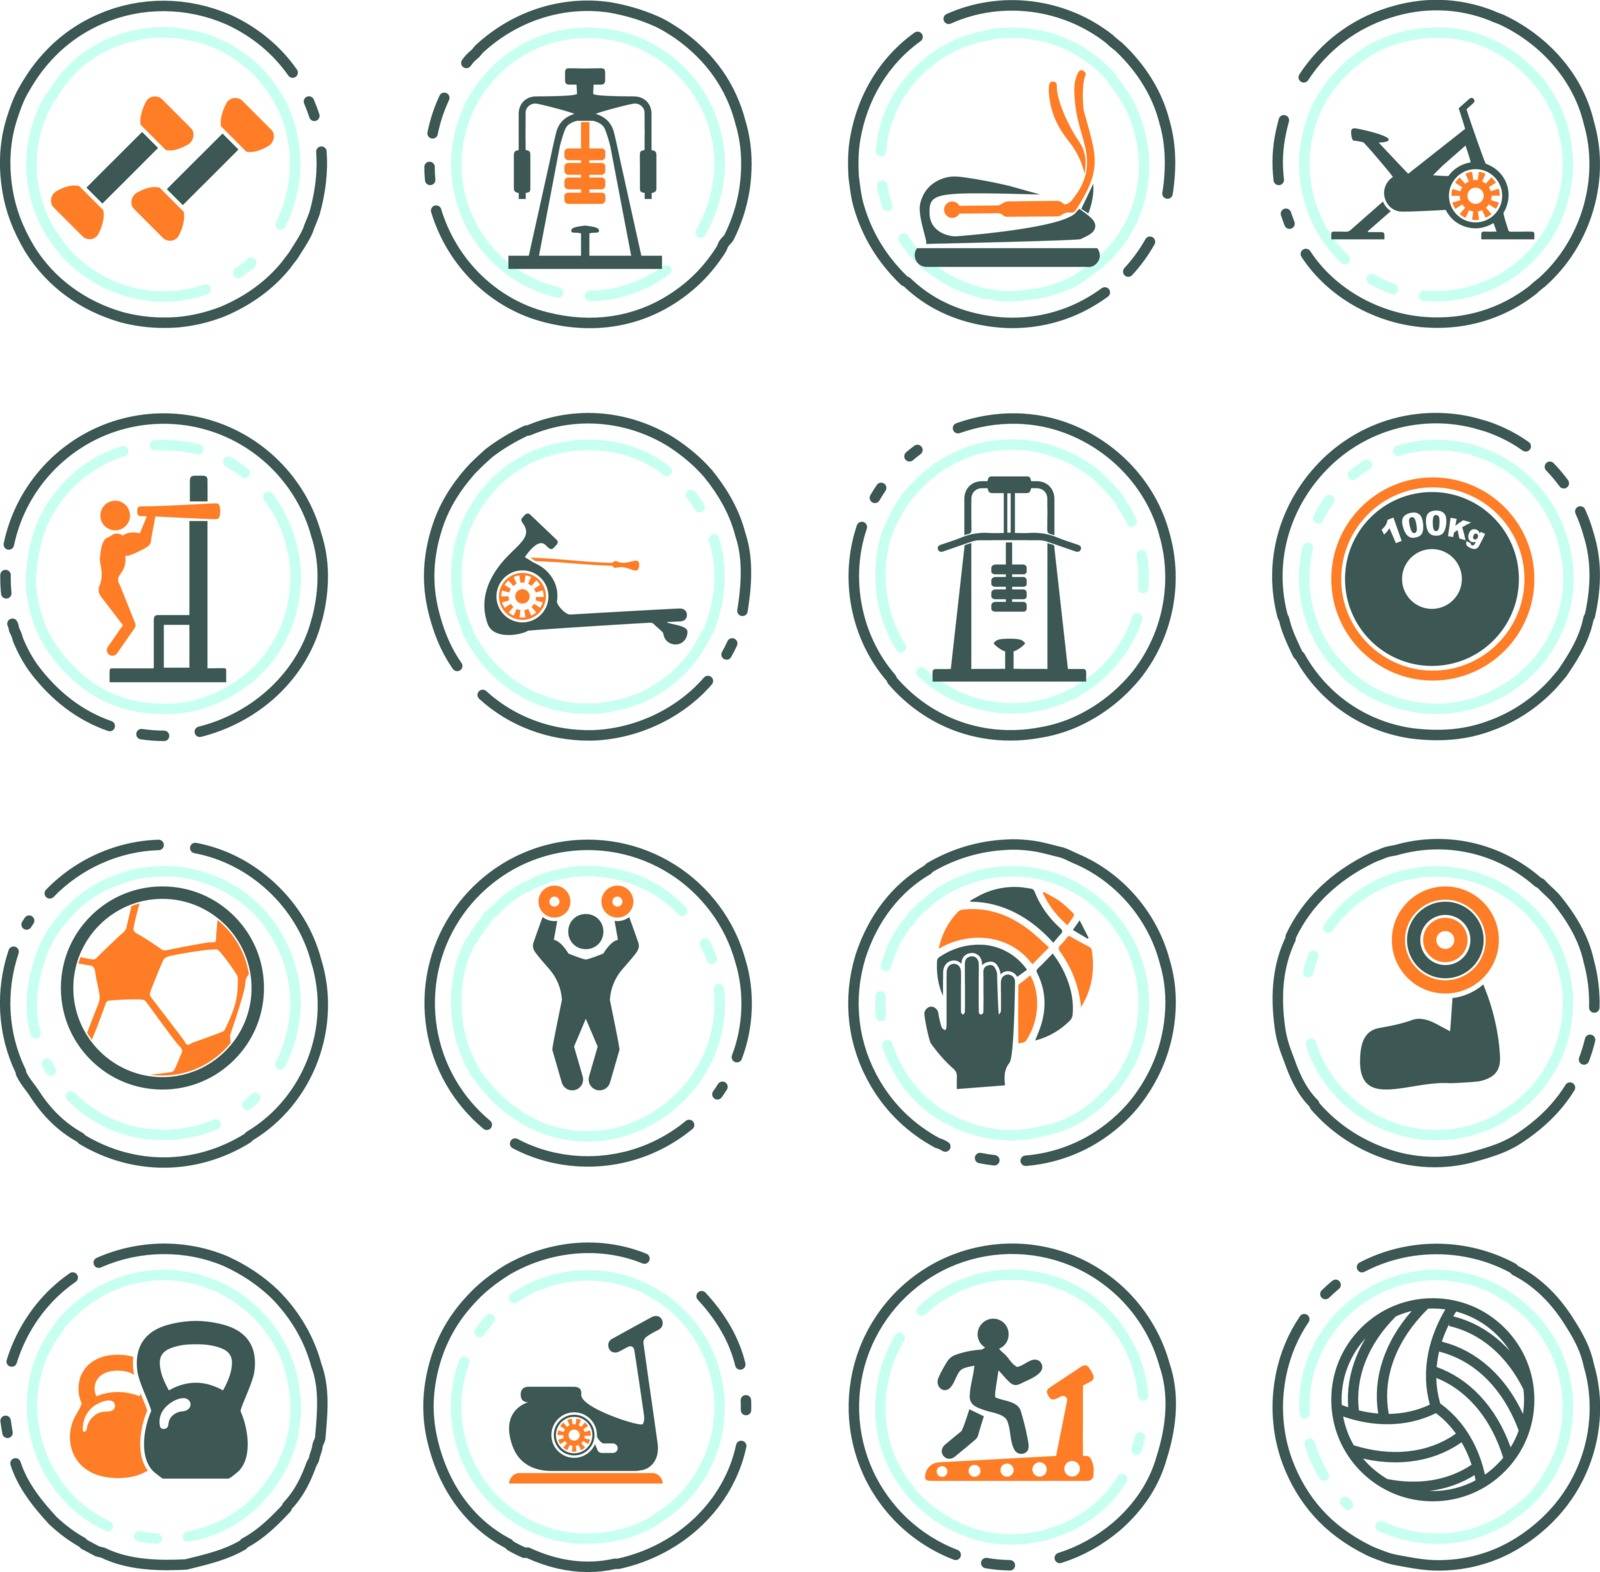 Sport equipments icons set for user interface